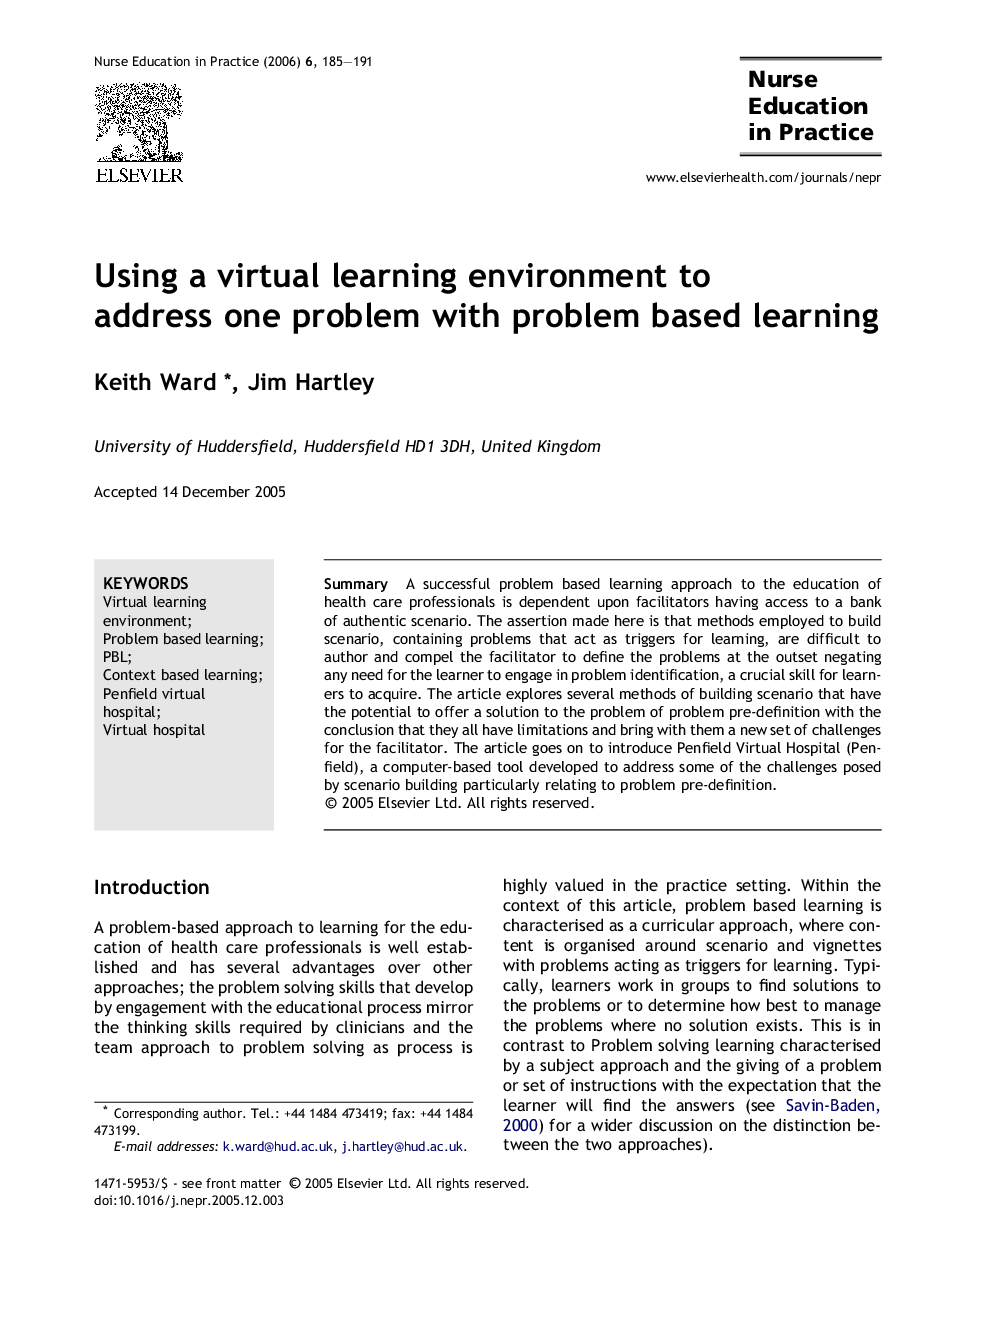 Using a virtual learning environment to address one problem with problem based learning